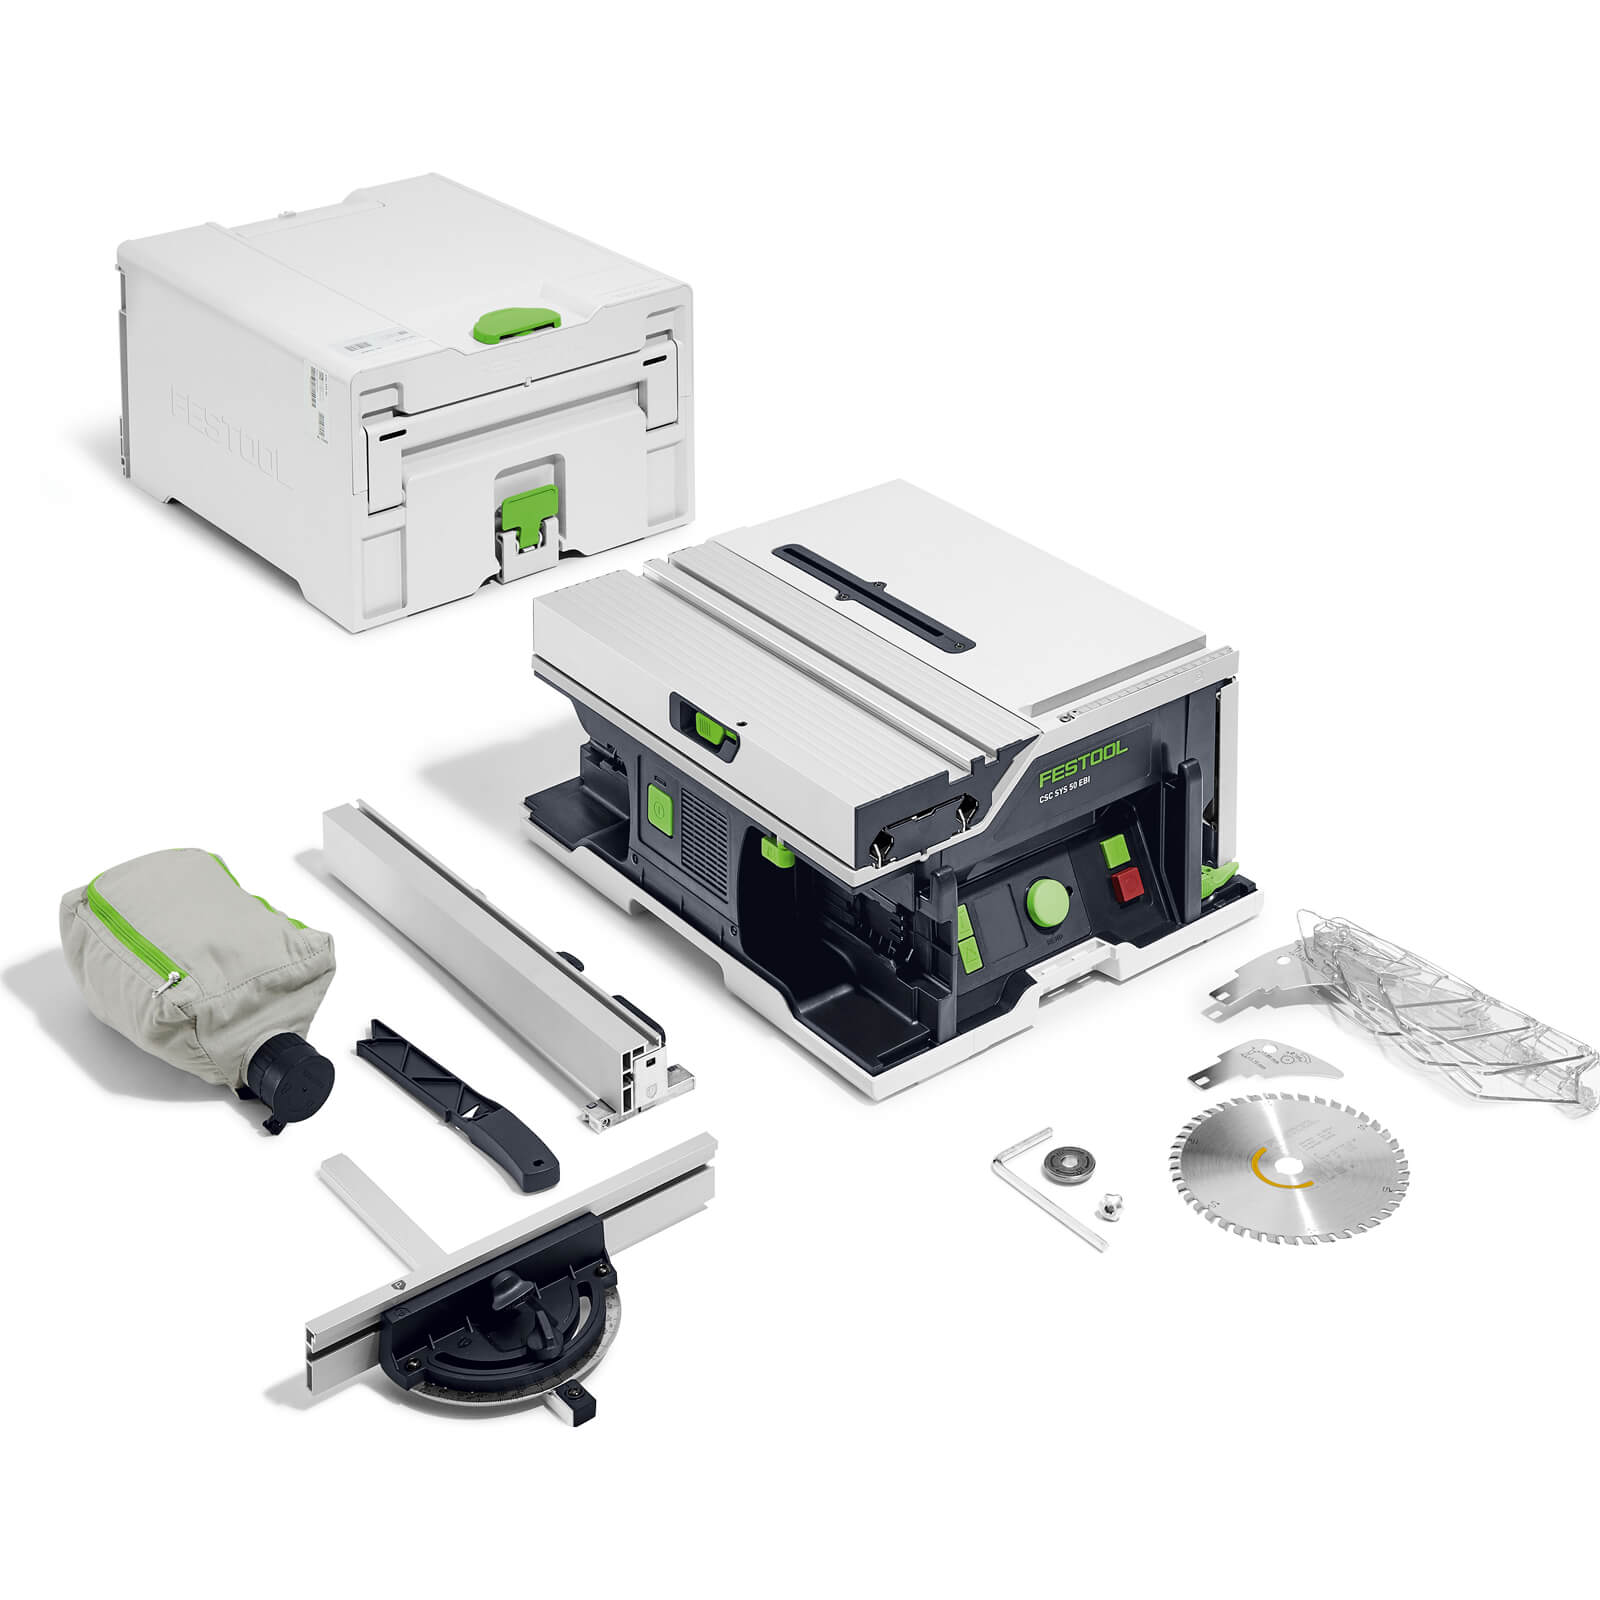 Image of Festool CSC SYS 50 EBI Brushless Precison Table Saw No Batteries No Charger Case